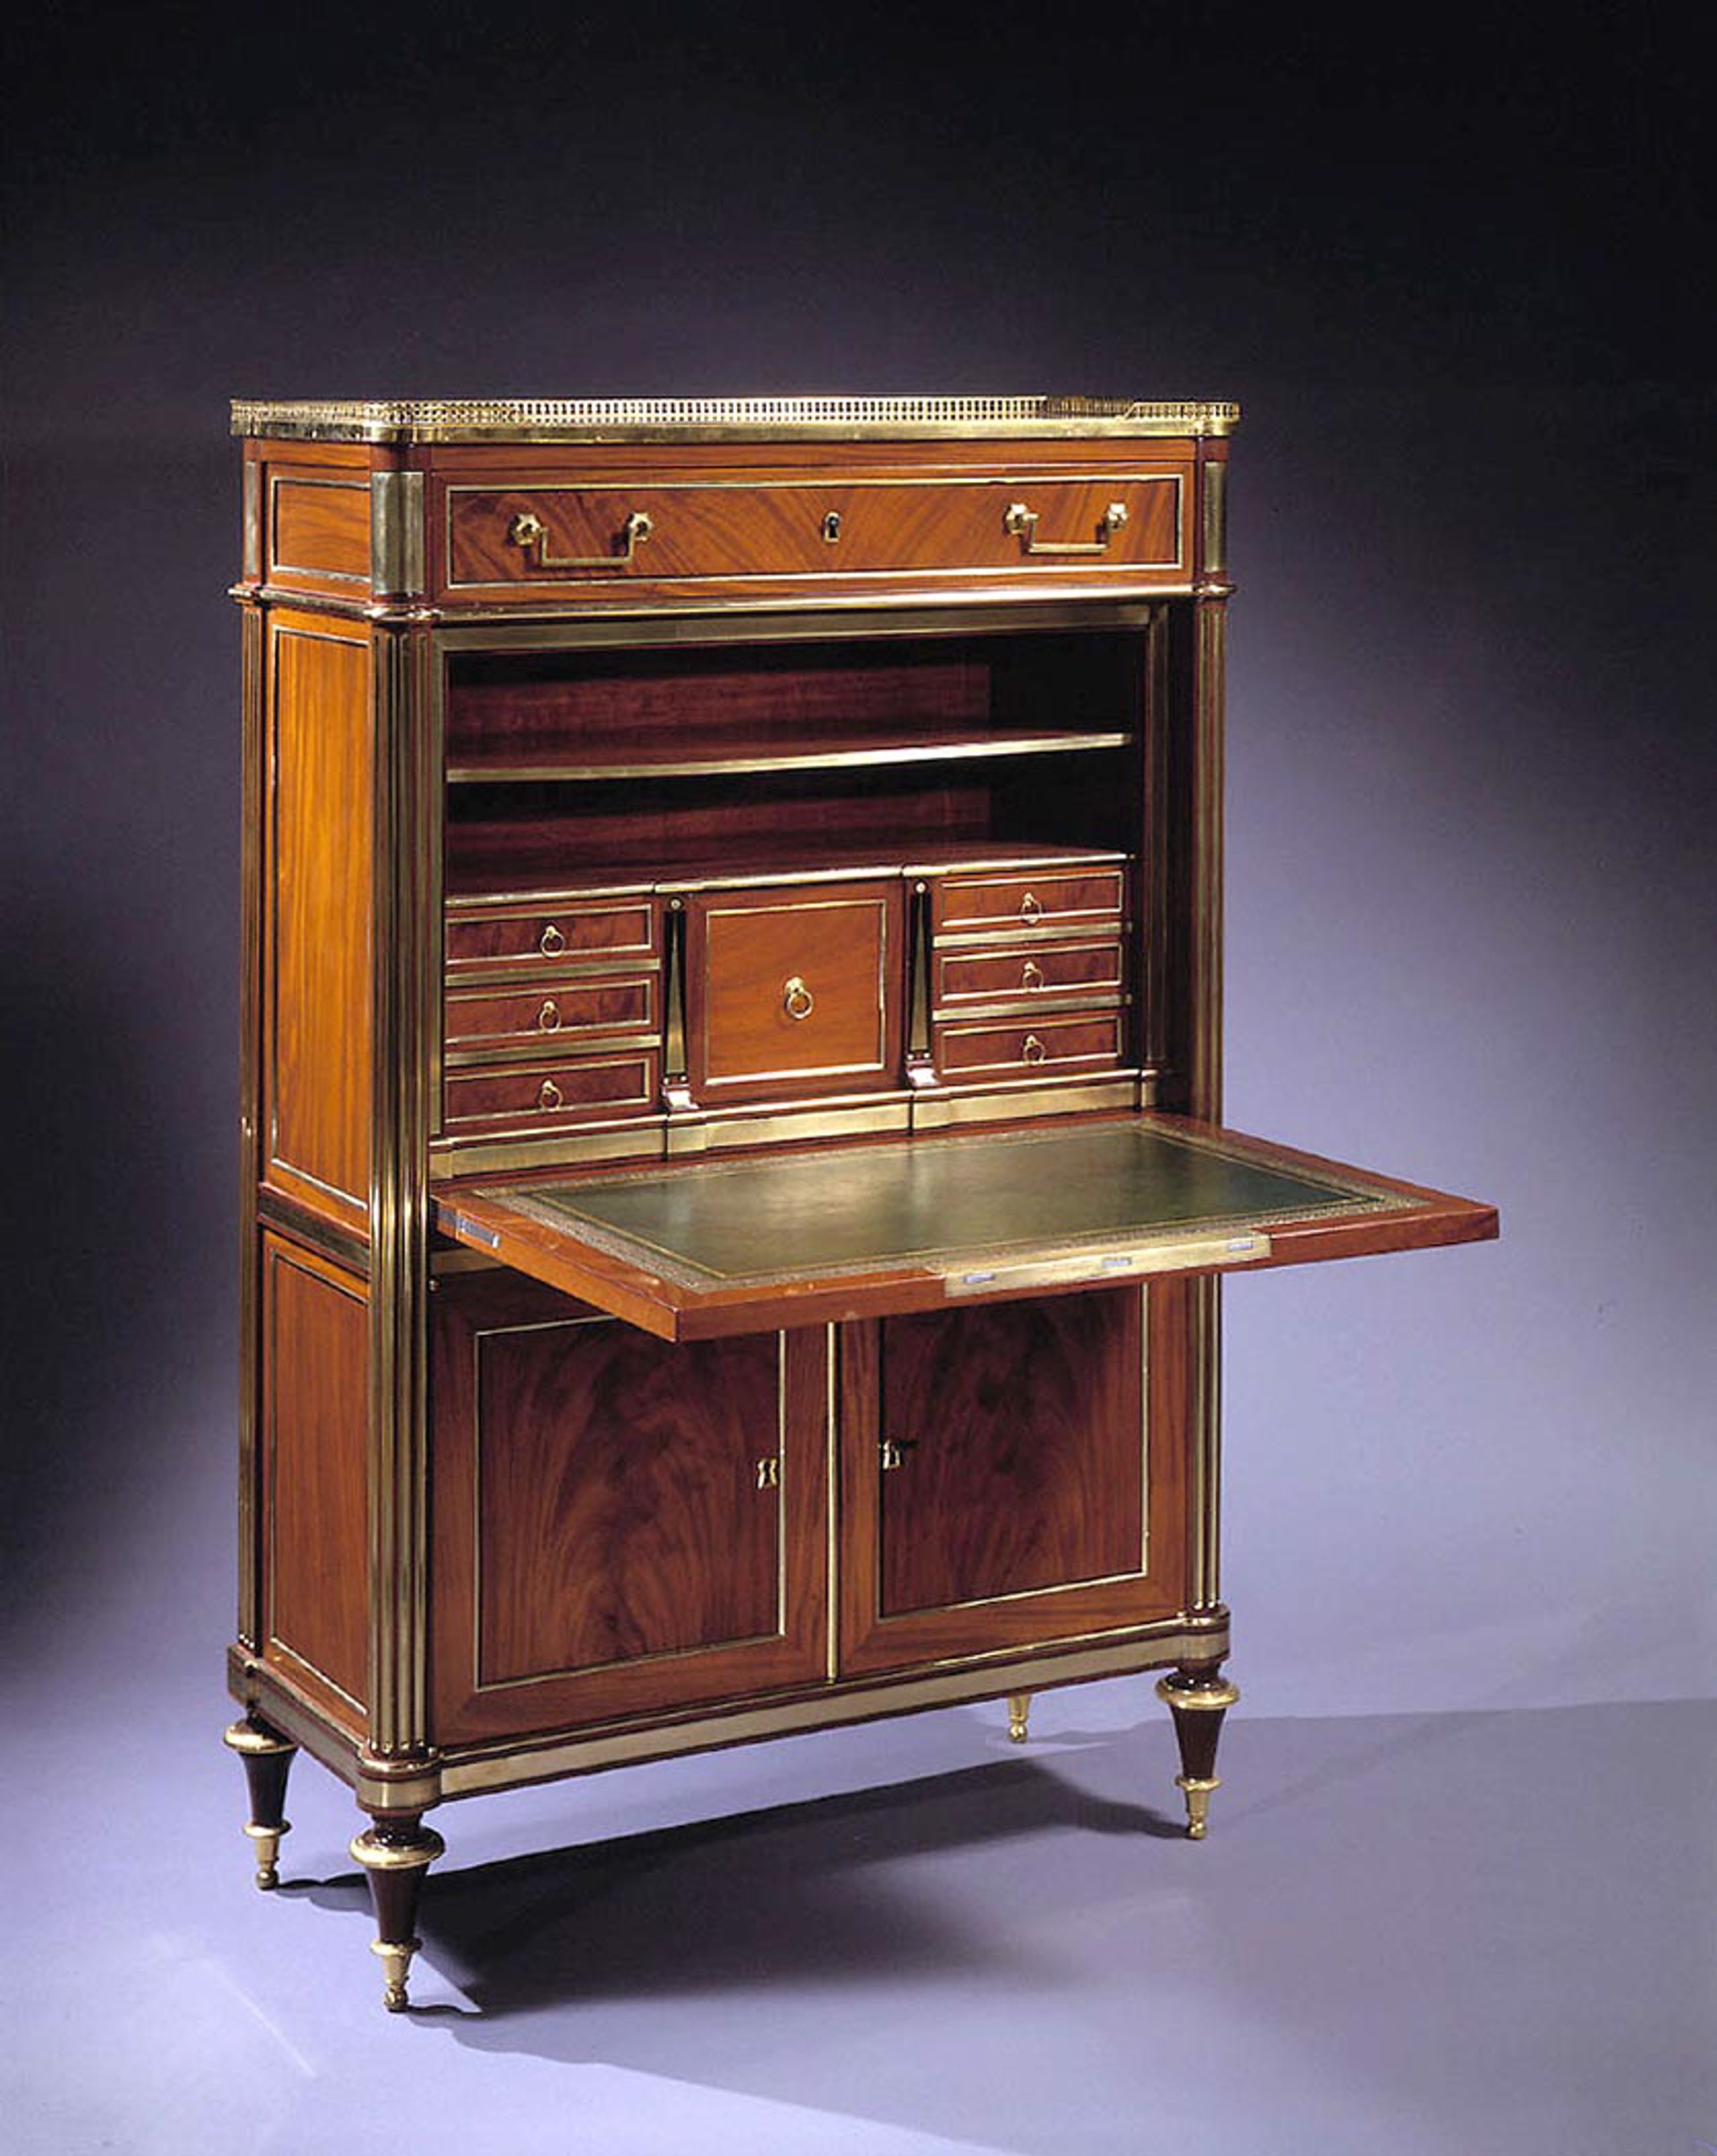 LOUIS XVI SECRETAIRE WITH MARBLE TOP BY H. JACOB by Henri Jacob